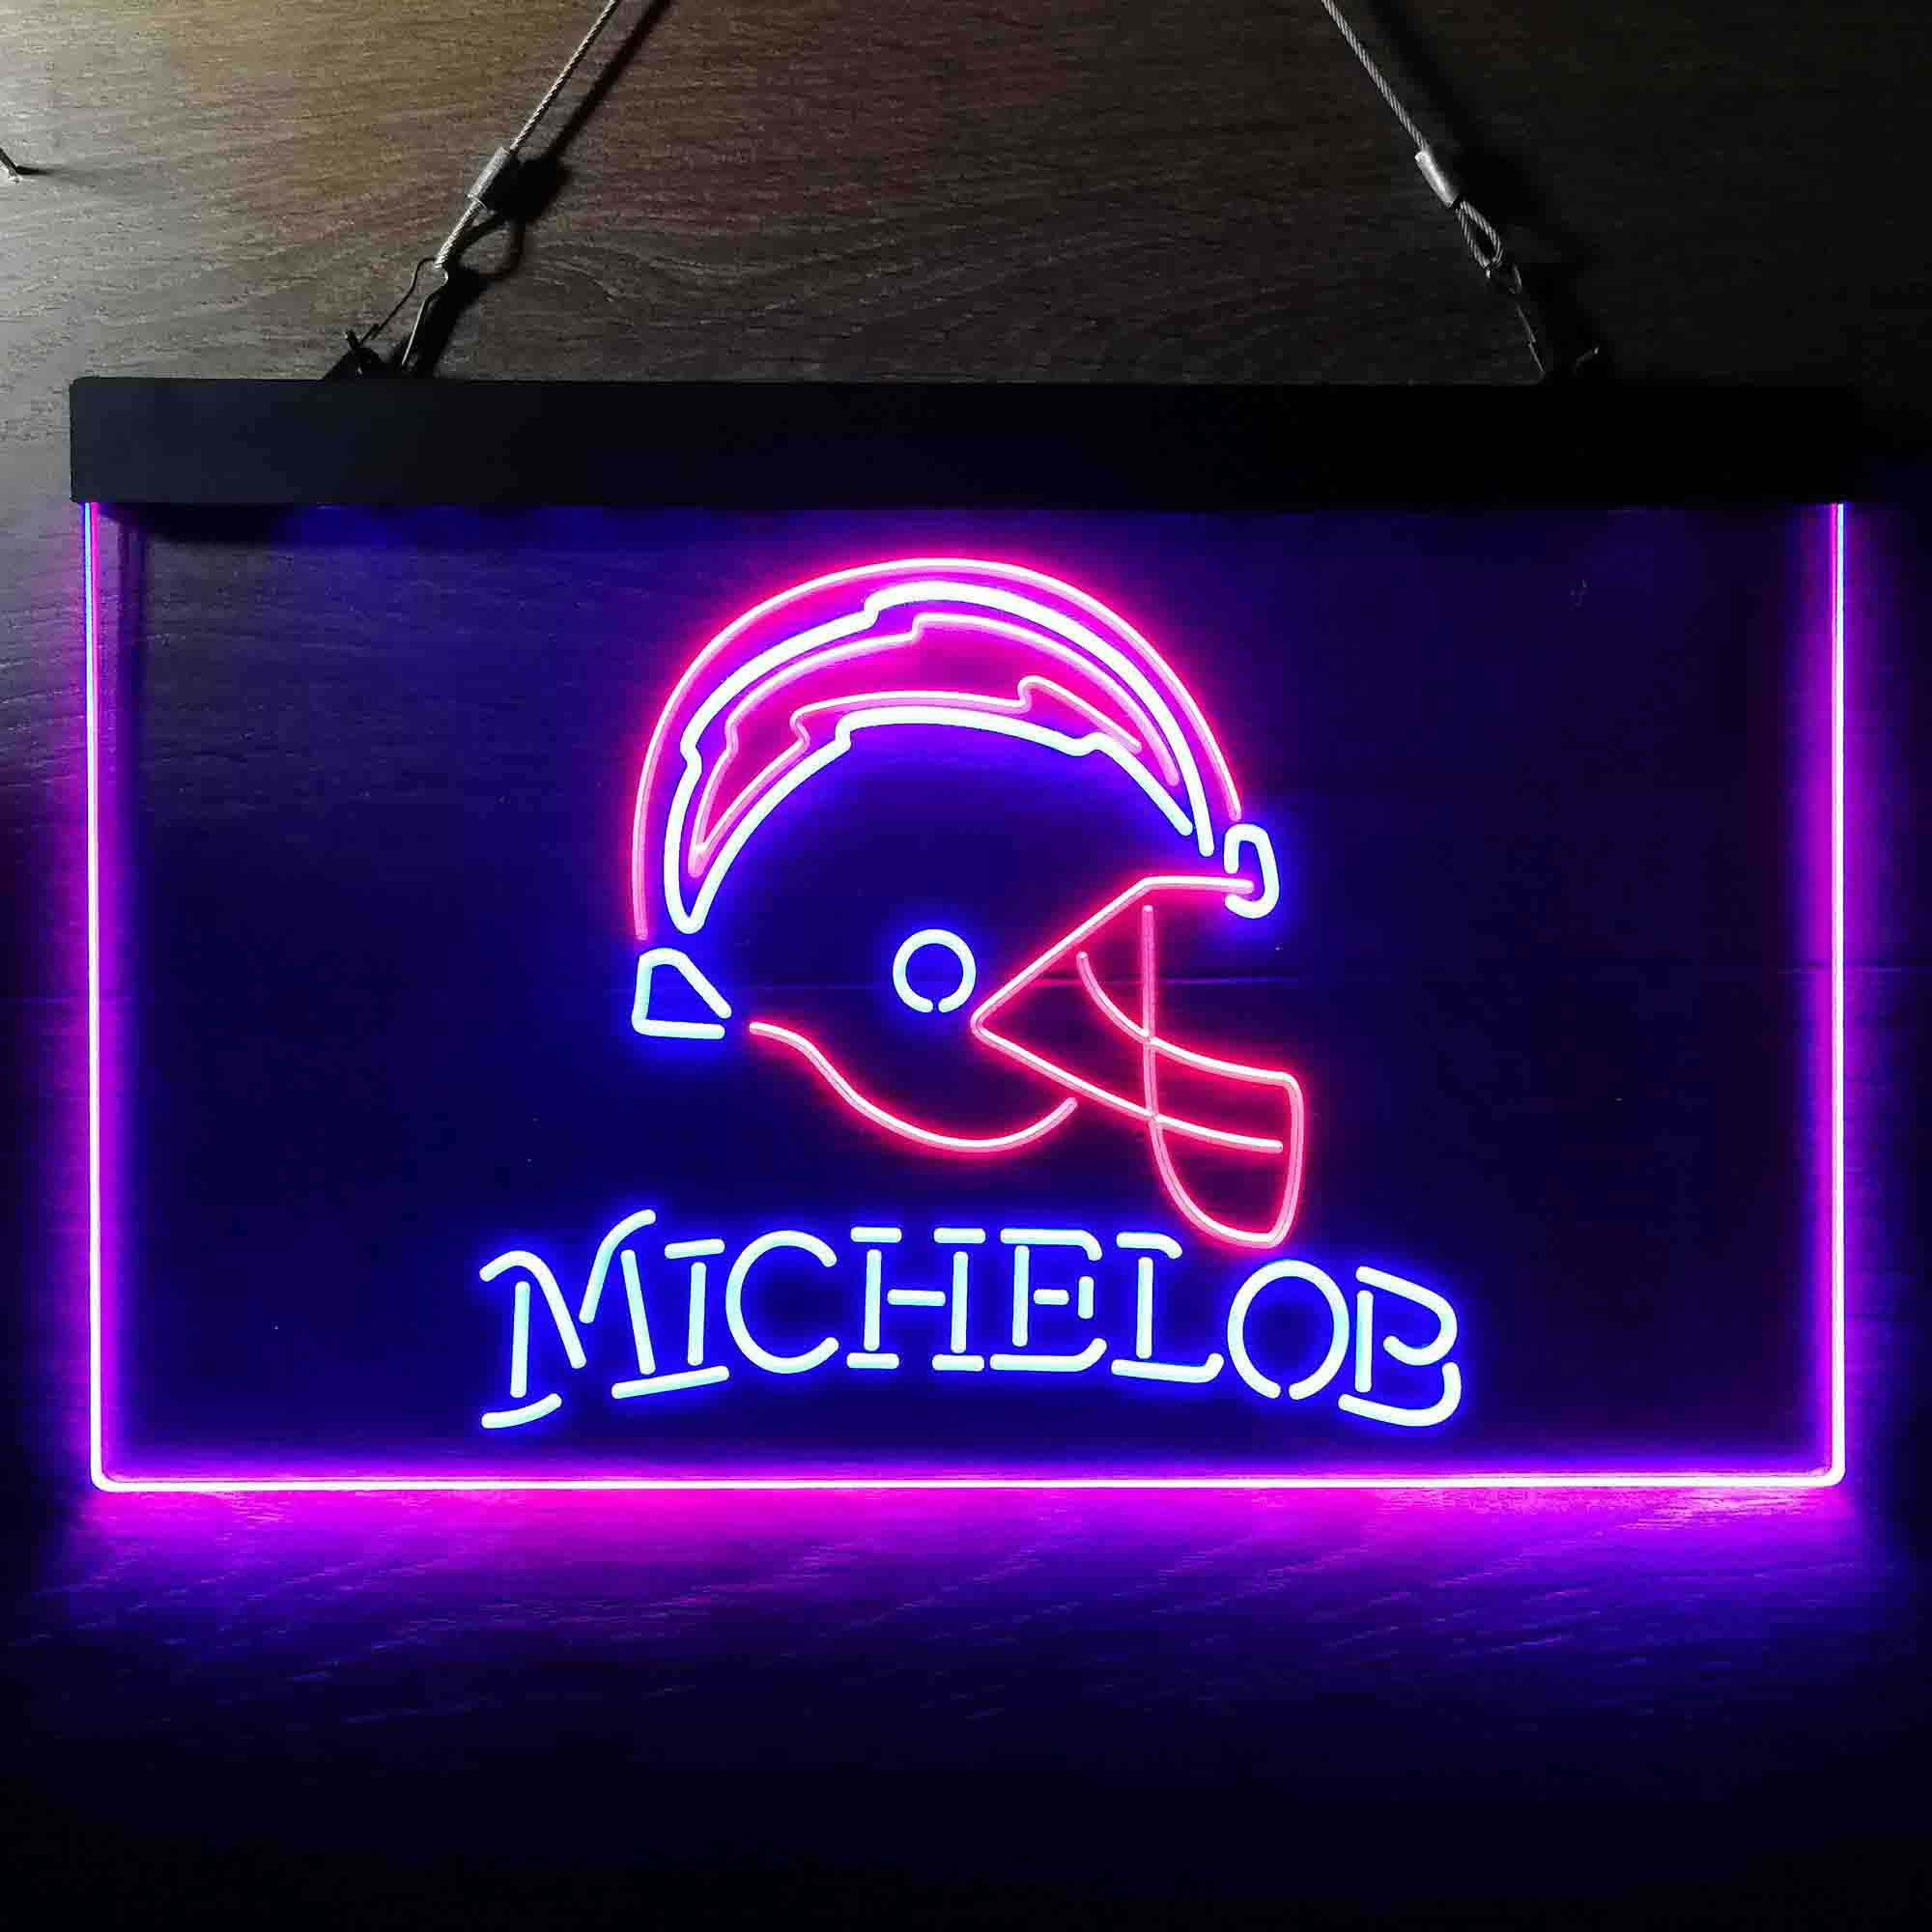 Michelob Bar Los Angeles Chargers Est. 1960 Neon LED Sign